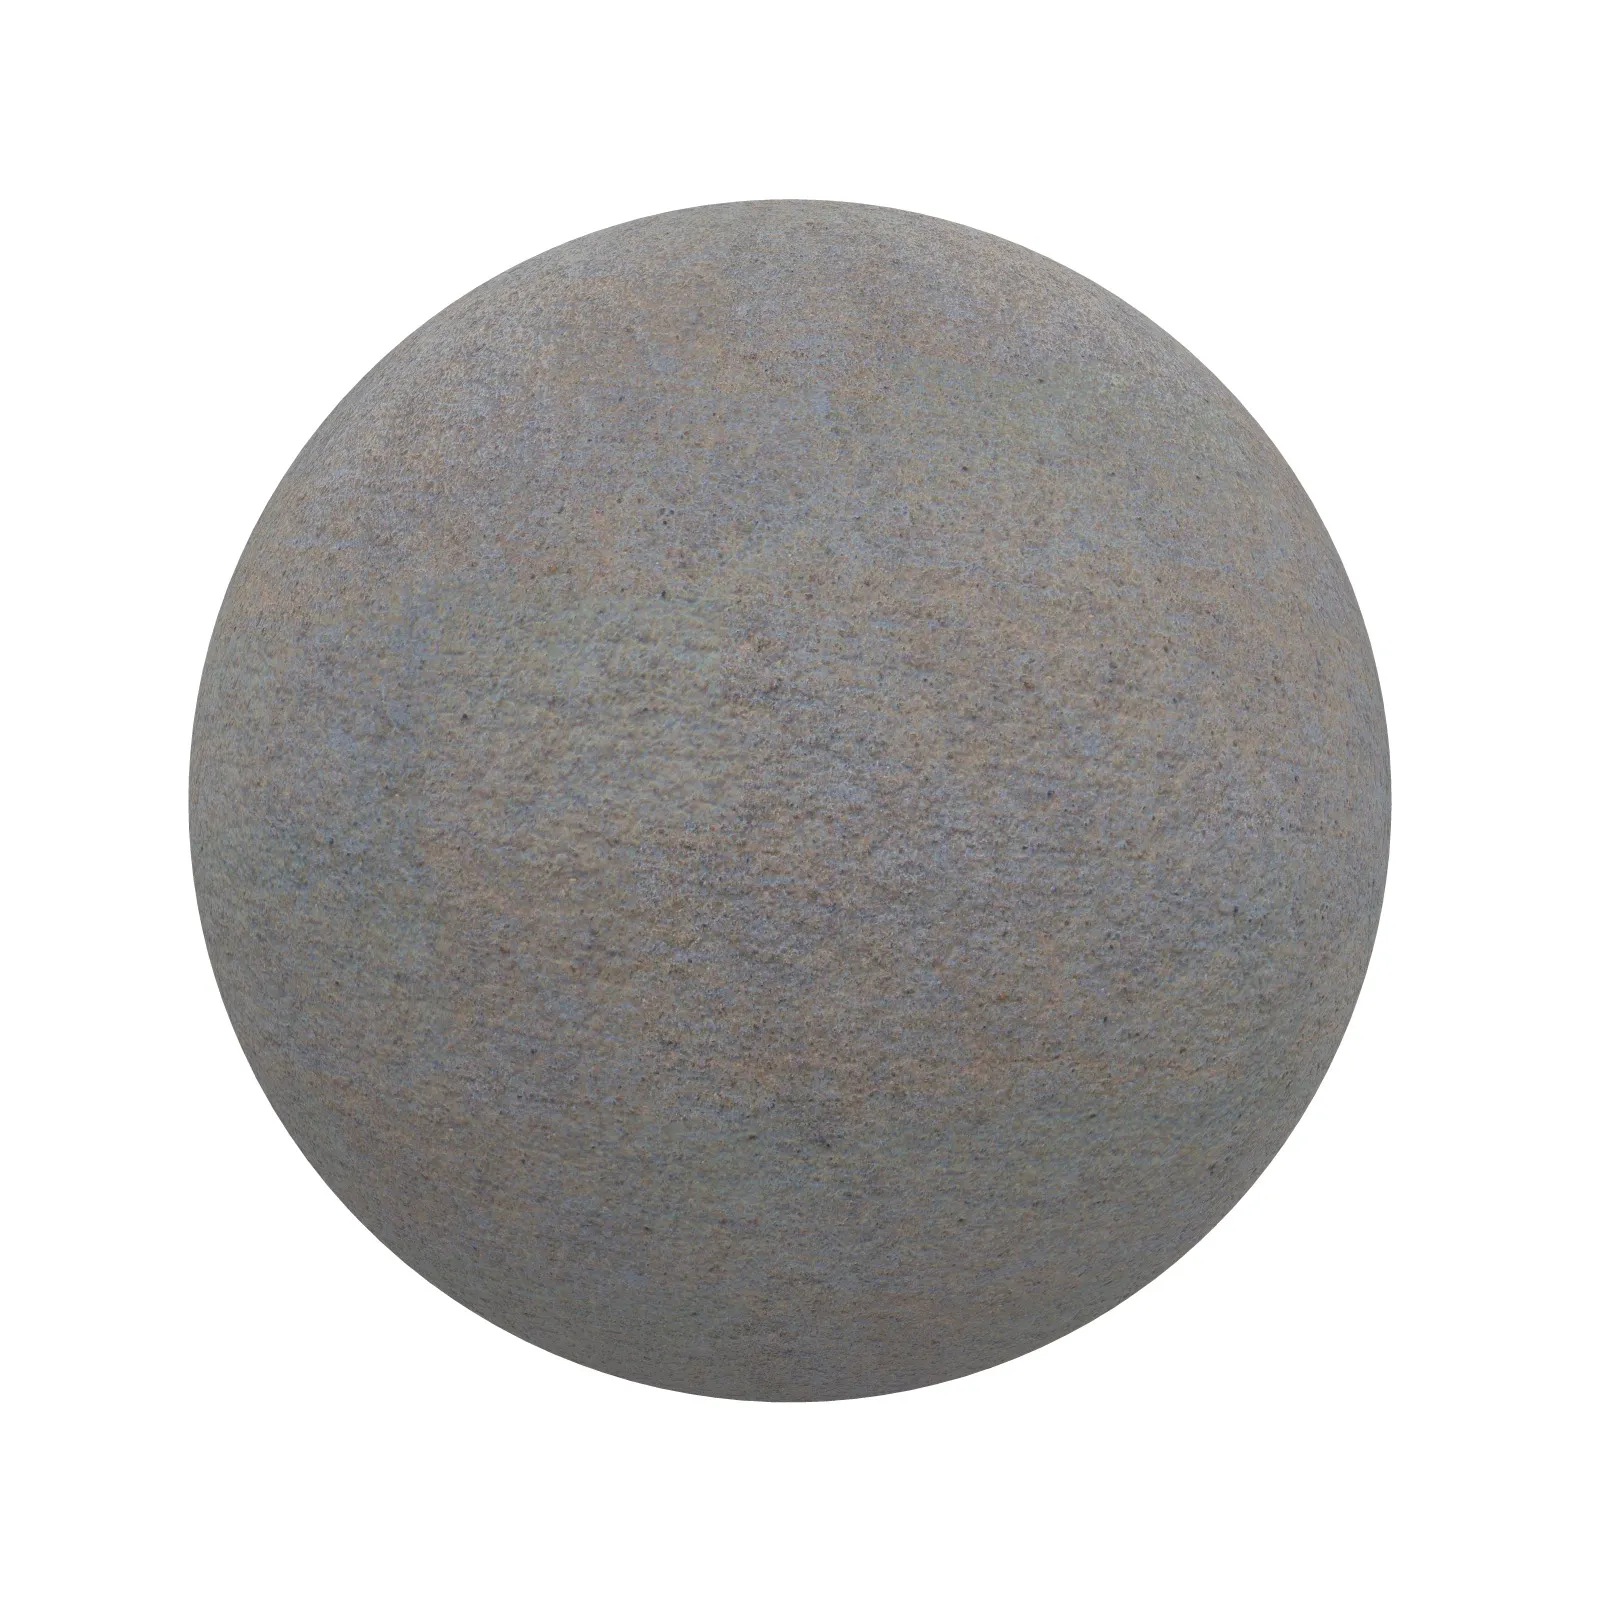 TEXTURES – STONES – CGAxis PBR Colection Vol 1 Stones – grey stone 2